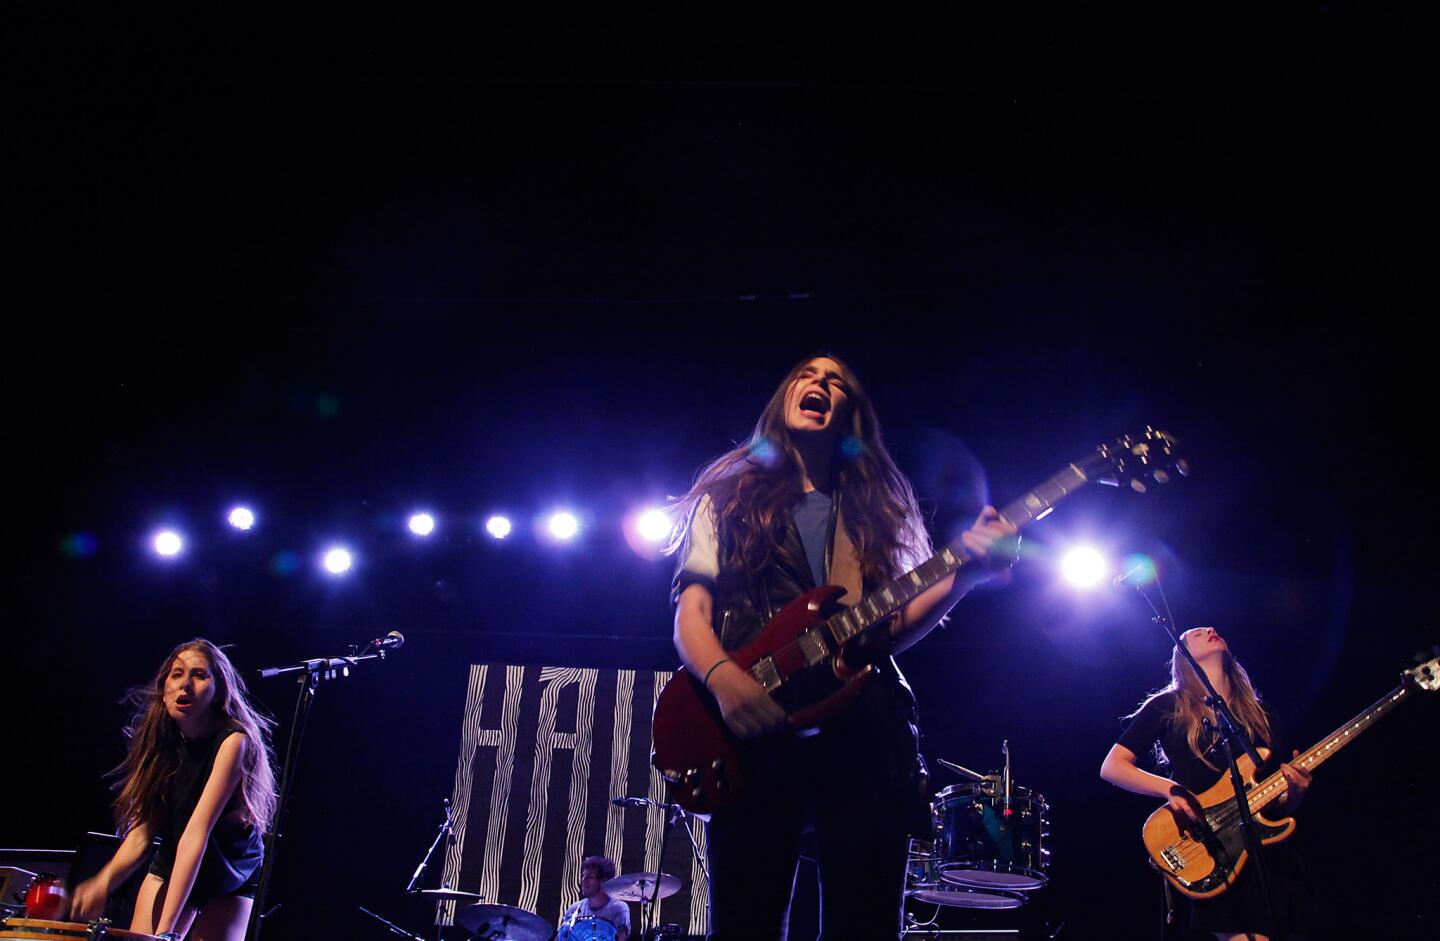 Haim, whose debut album "Days Are Gone" opened at No. 1 in the U.K. and No. 6 in the U.S., played a sold-out homecoming show at the Fonda Theatre in Los Angeles on Wednesday night. Alana, left, Danielle and Este Haim grew up in the Valley. The three sisters' band includes a mister, drummer Dash Hutton.